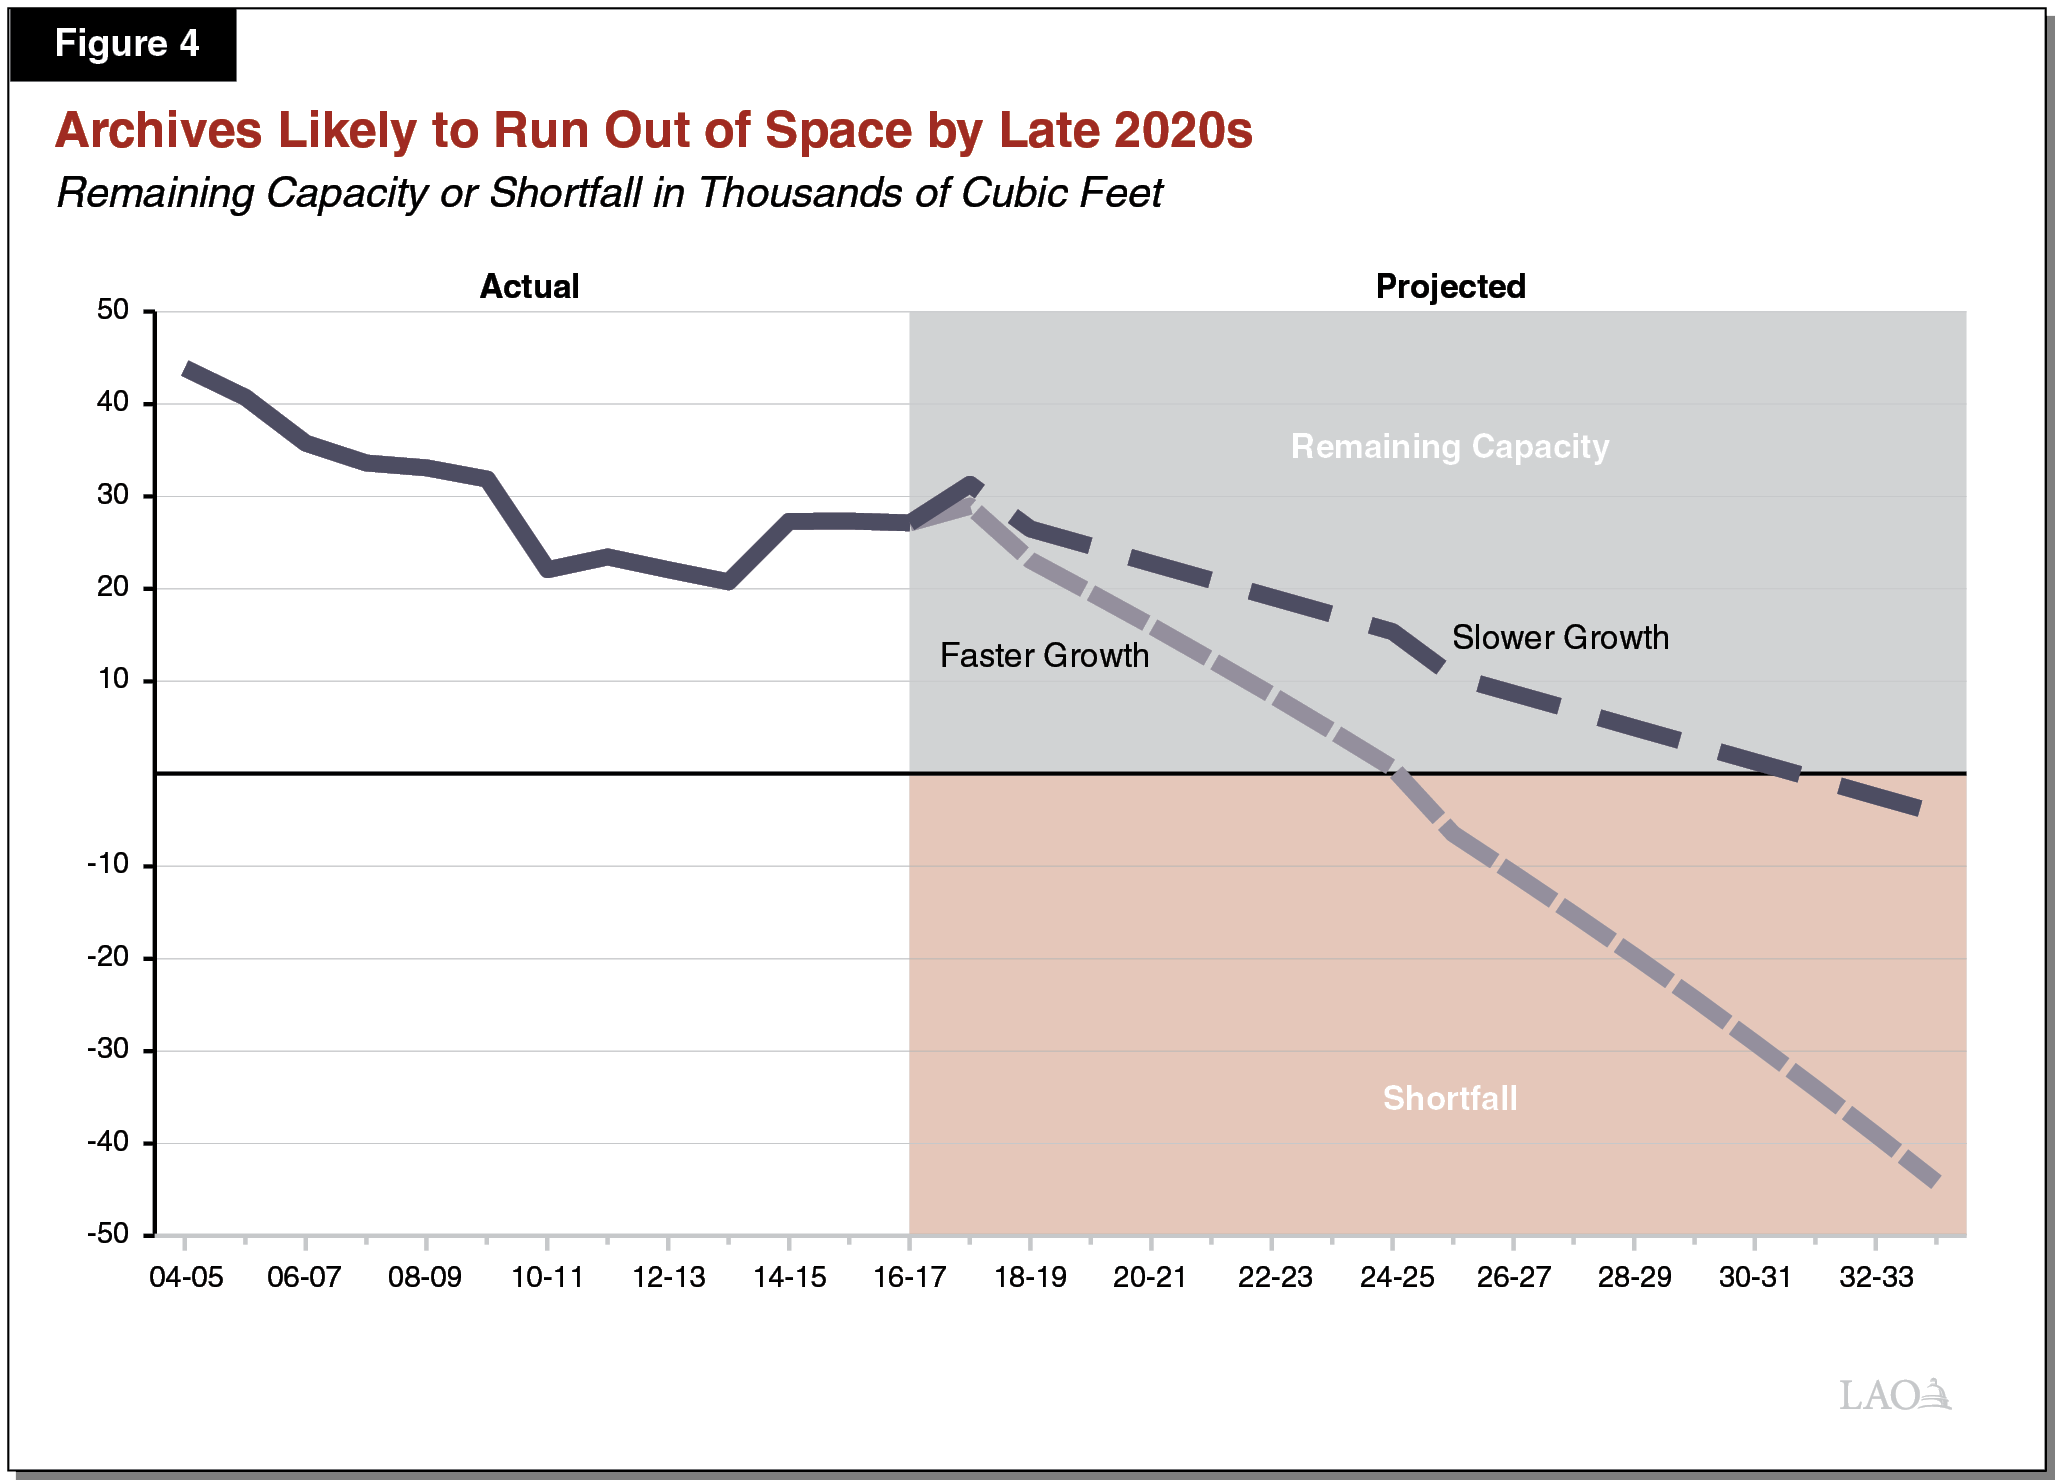 Figure 4 - Archives Likely to Run Out of Space By Late 2020s